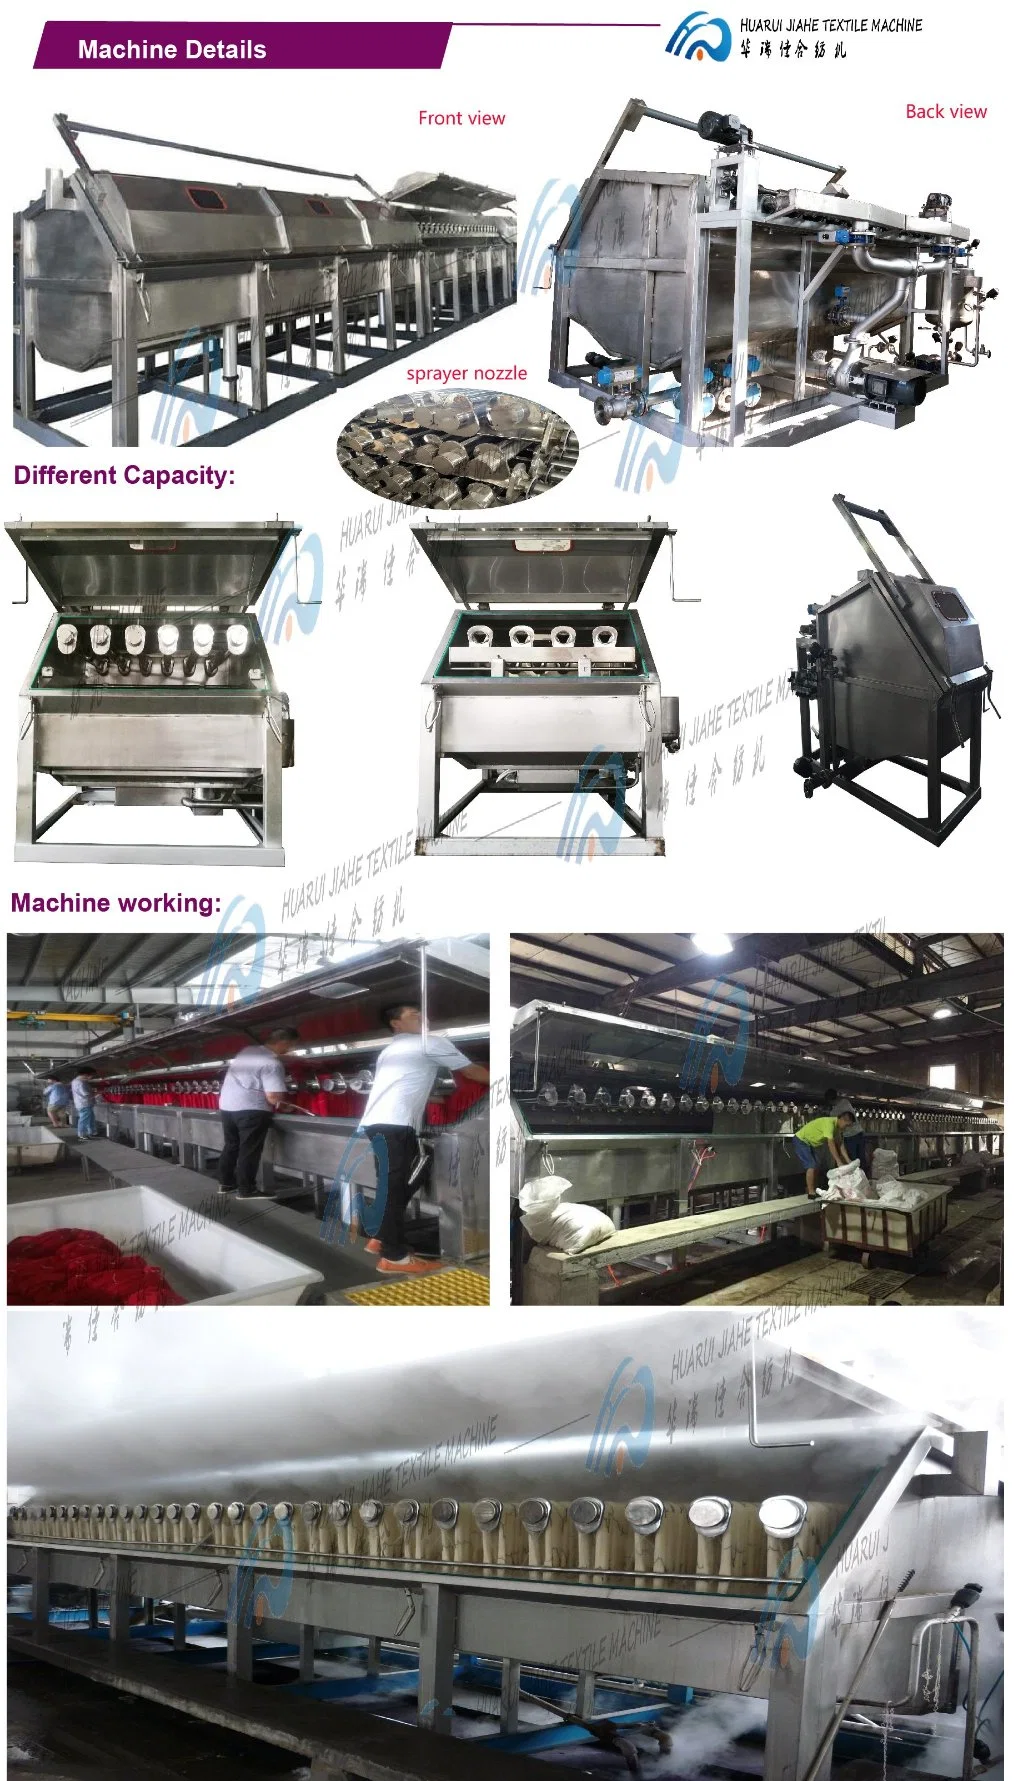 Normal Temperature Jet Hank Dyeing Machine Continuous Dyeing Machine Jet Dyeing Machine Dyed and Washed in Water Factory Dyeing Machine Manufacture